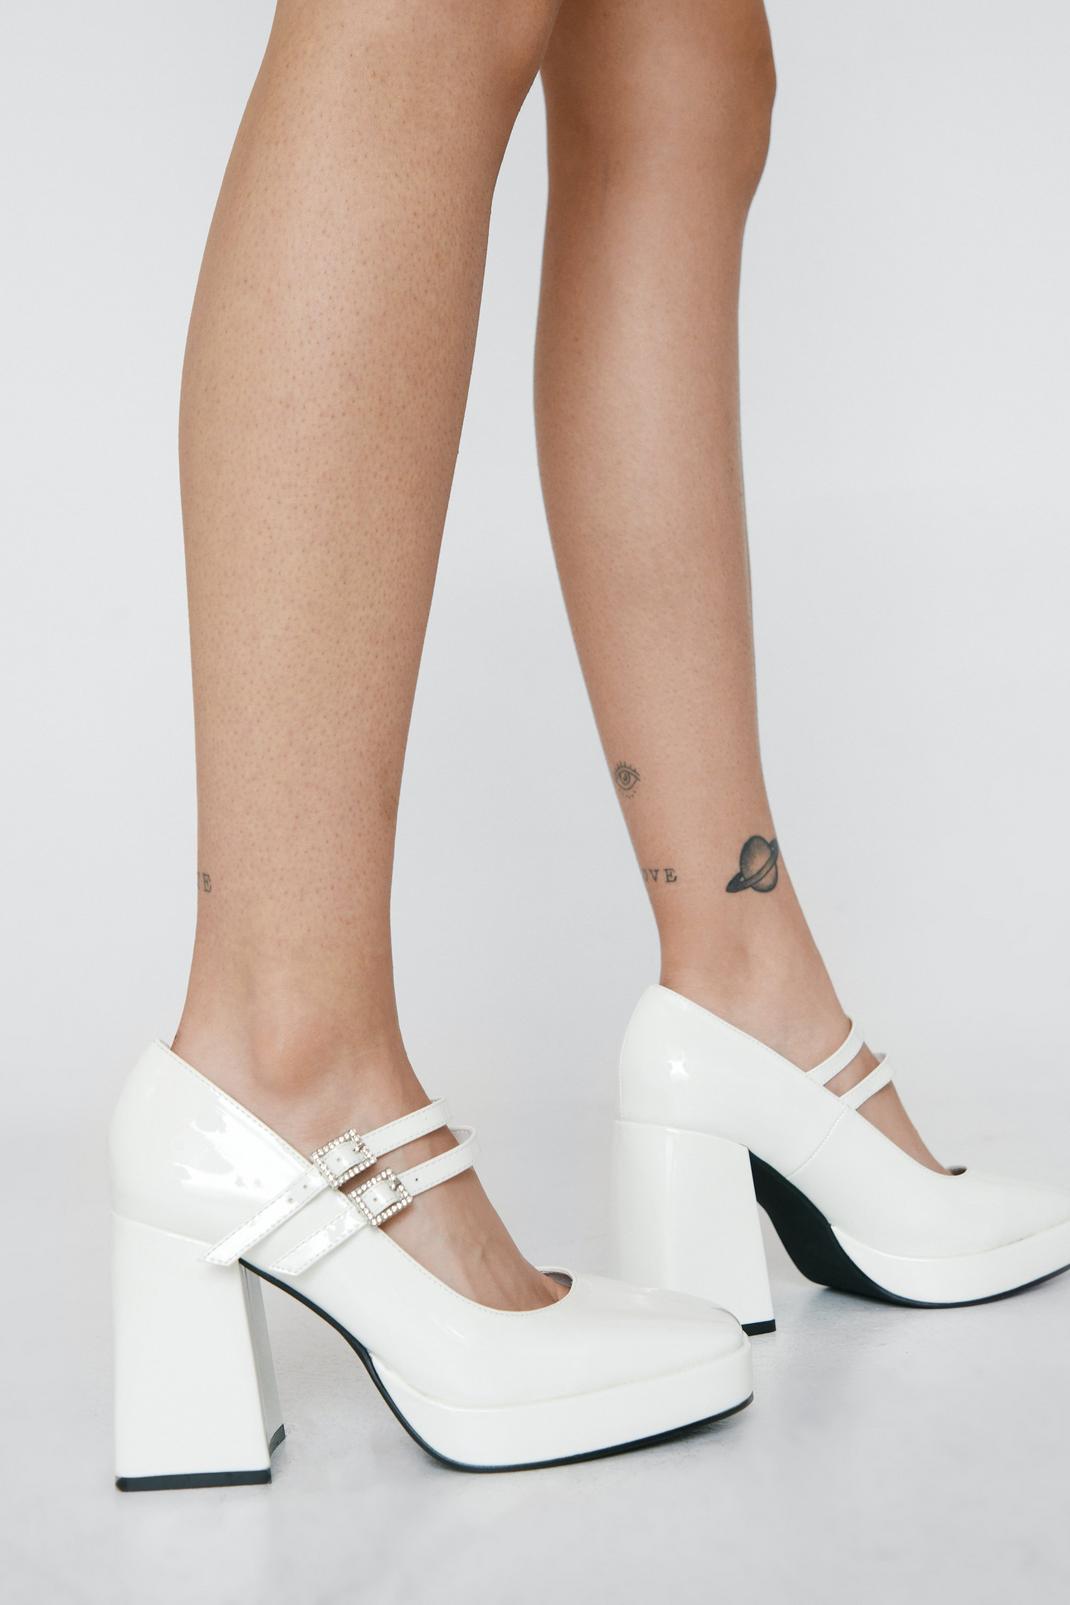 White Patent Flared Heel Mary Jane Shoes image number 1